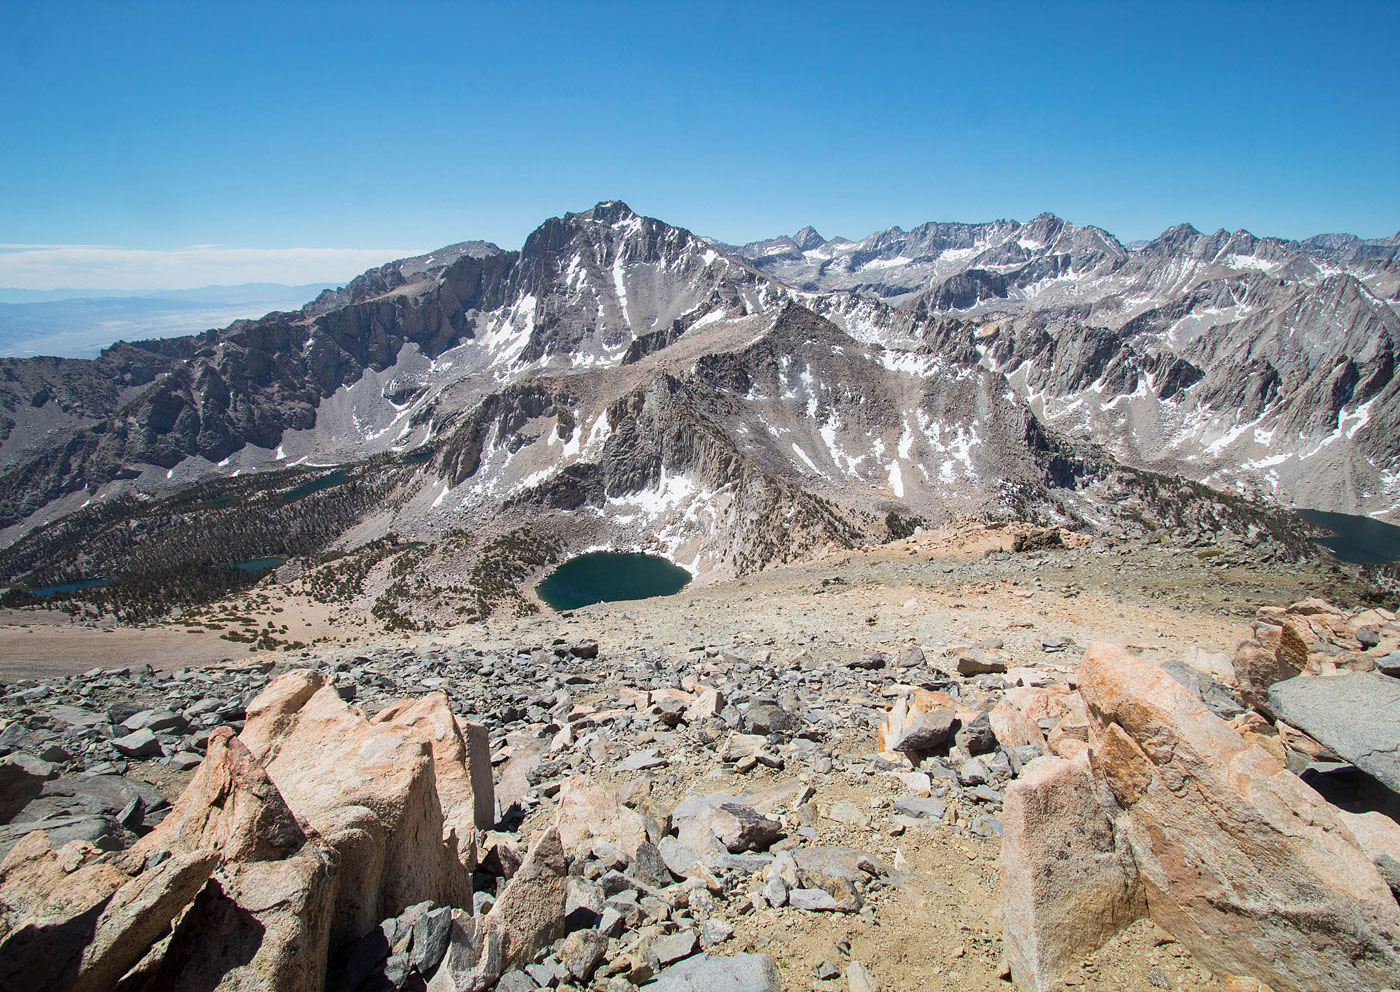 Hike Mount Gould in Inyo National Forest, California - Stav is Lost